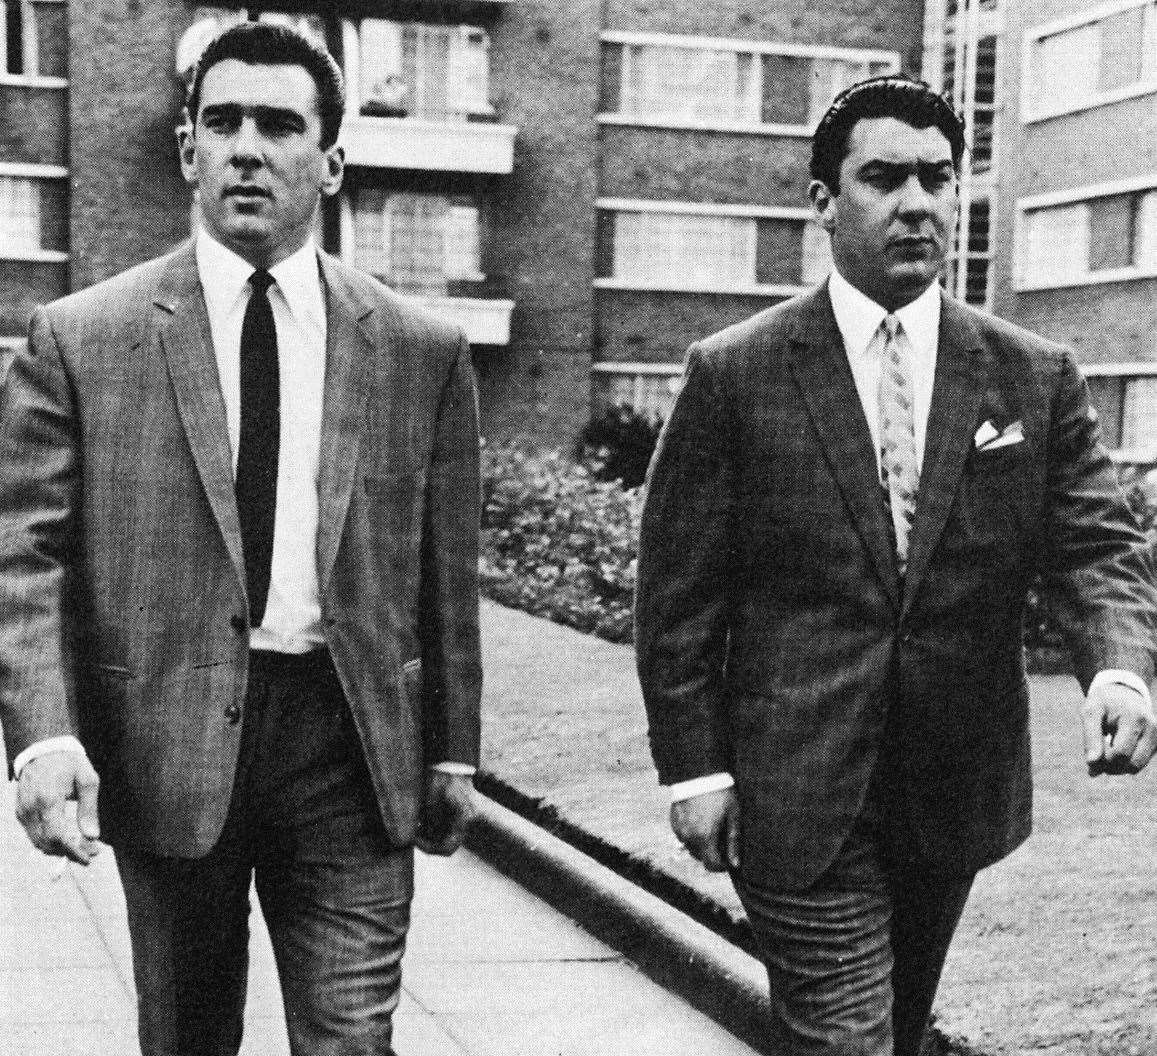 The Kray twins were held at HMP Canterbury